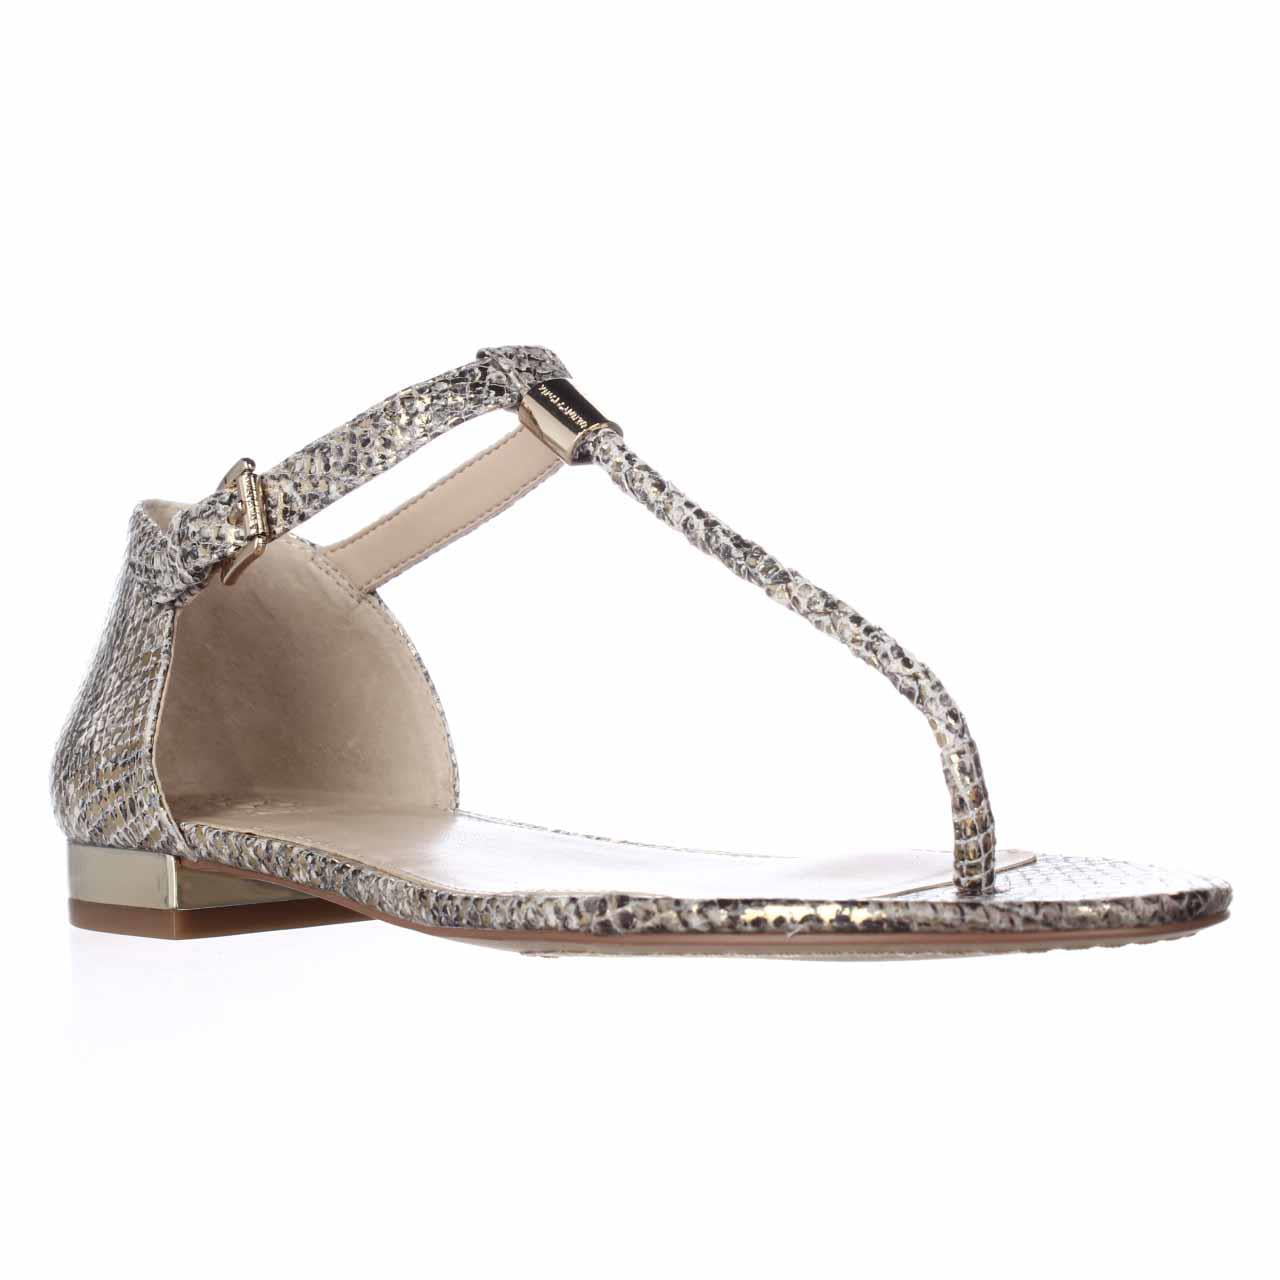 Vince Camuto - Womens Vince Camuto Halana T-Strap Flat Sandals - Gold ...